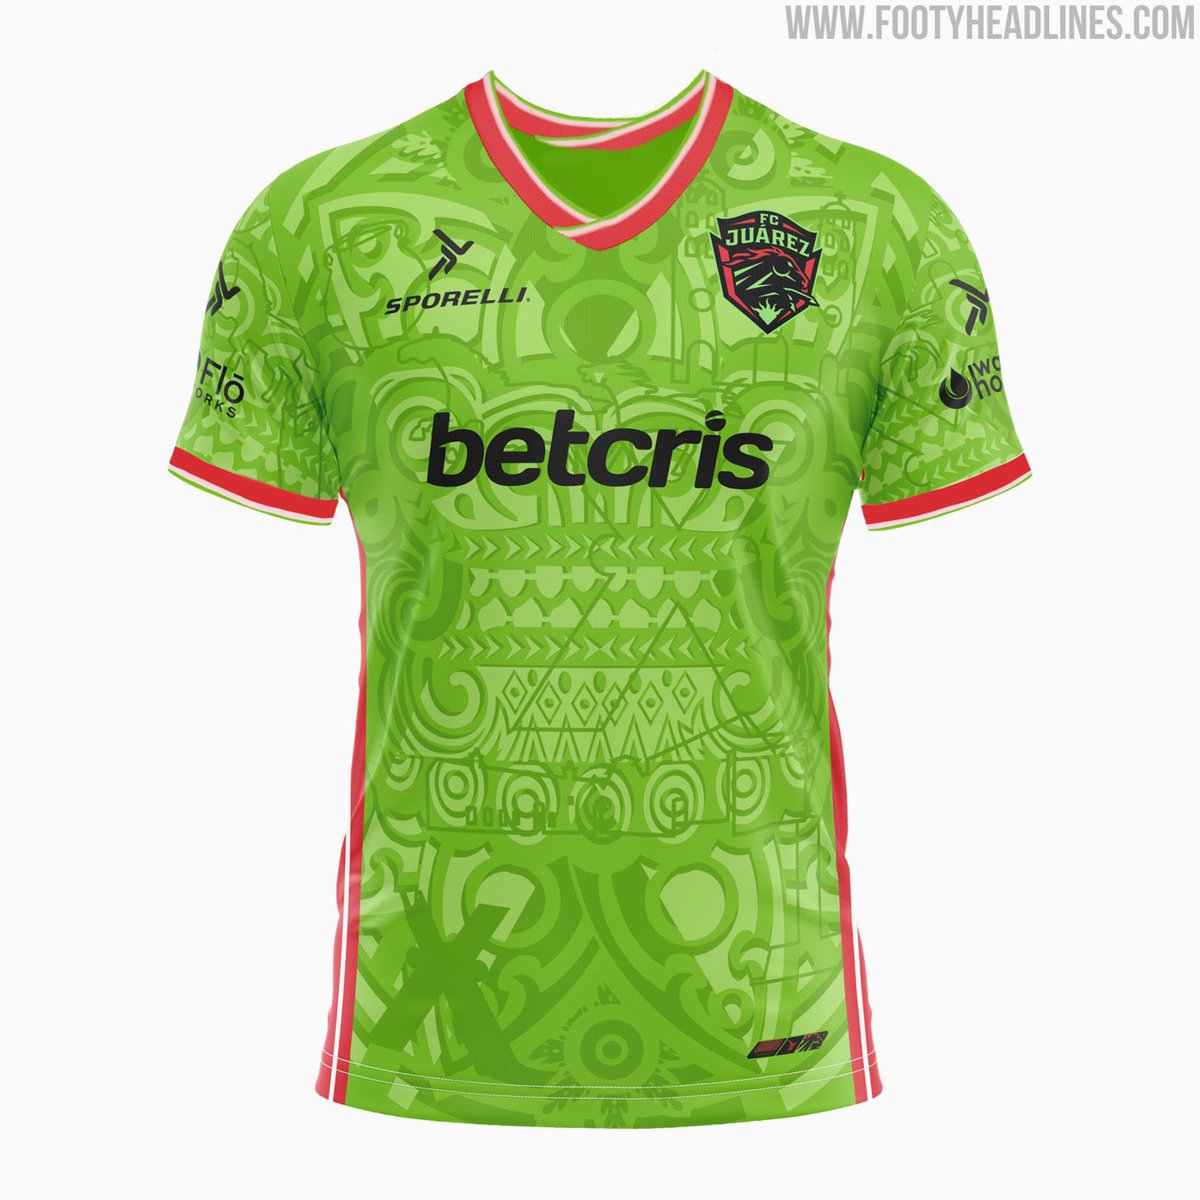 Can any one find me this, authentic? #fcjuarez #ligamx